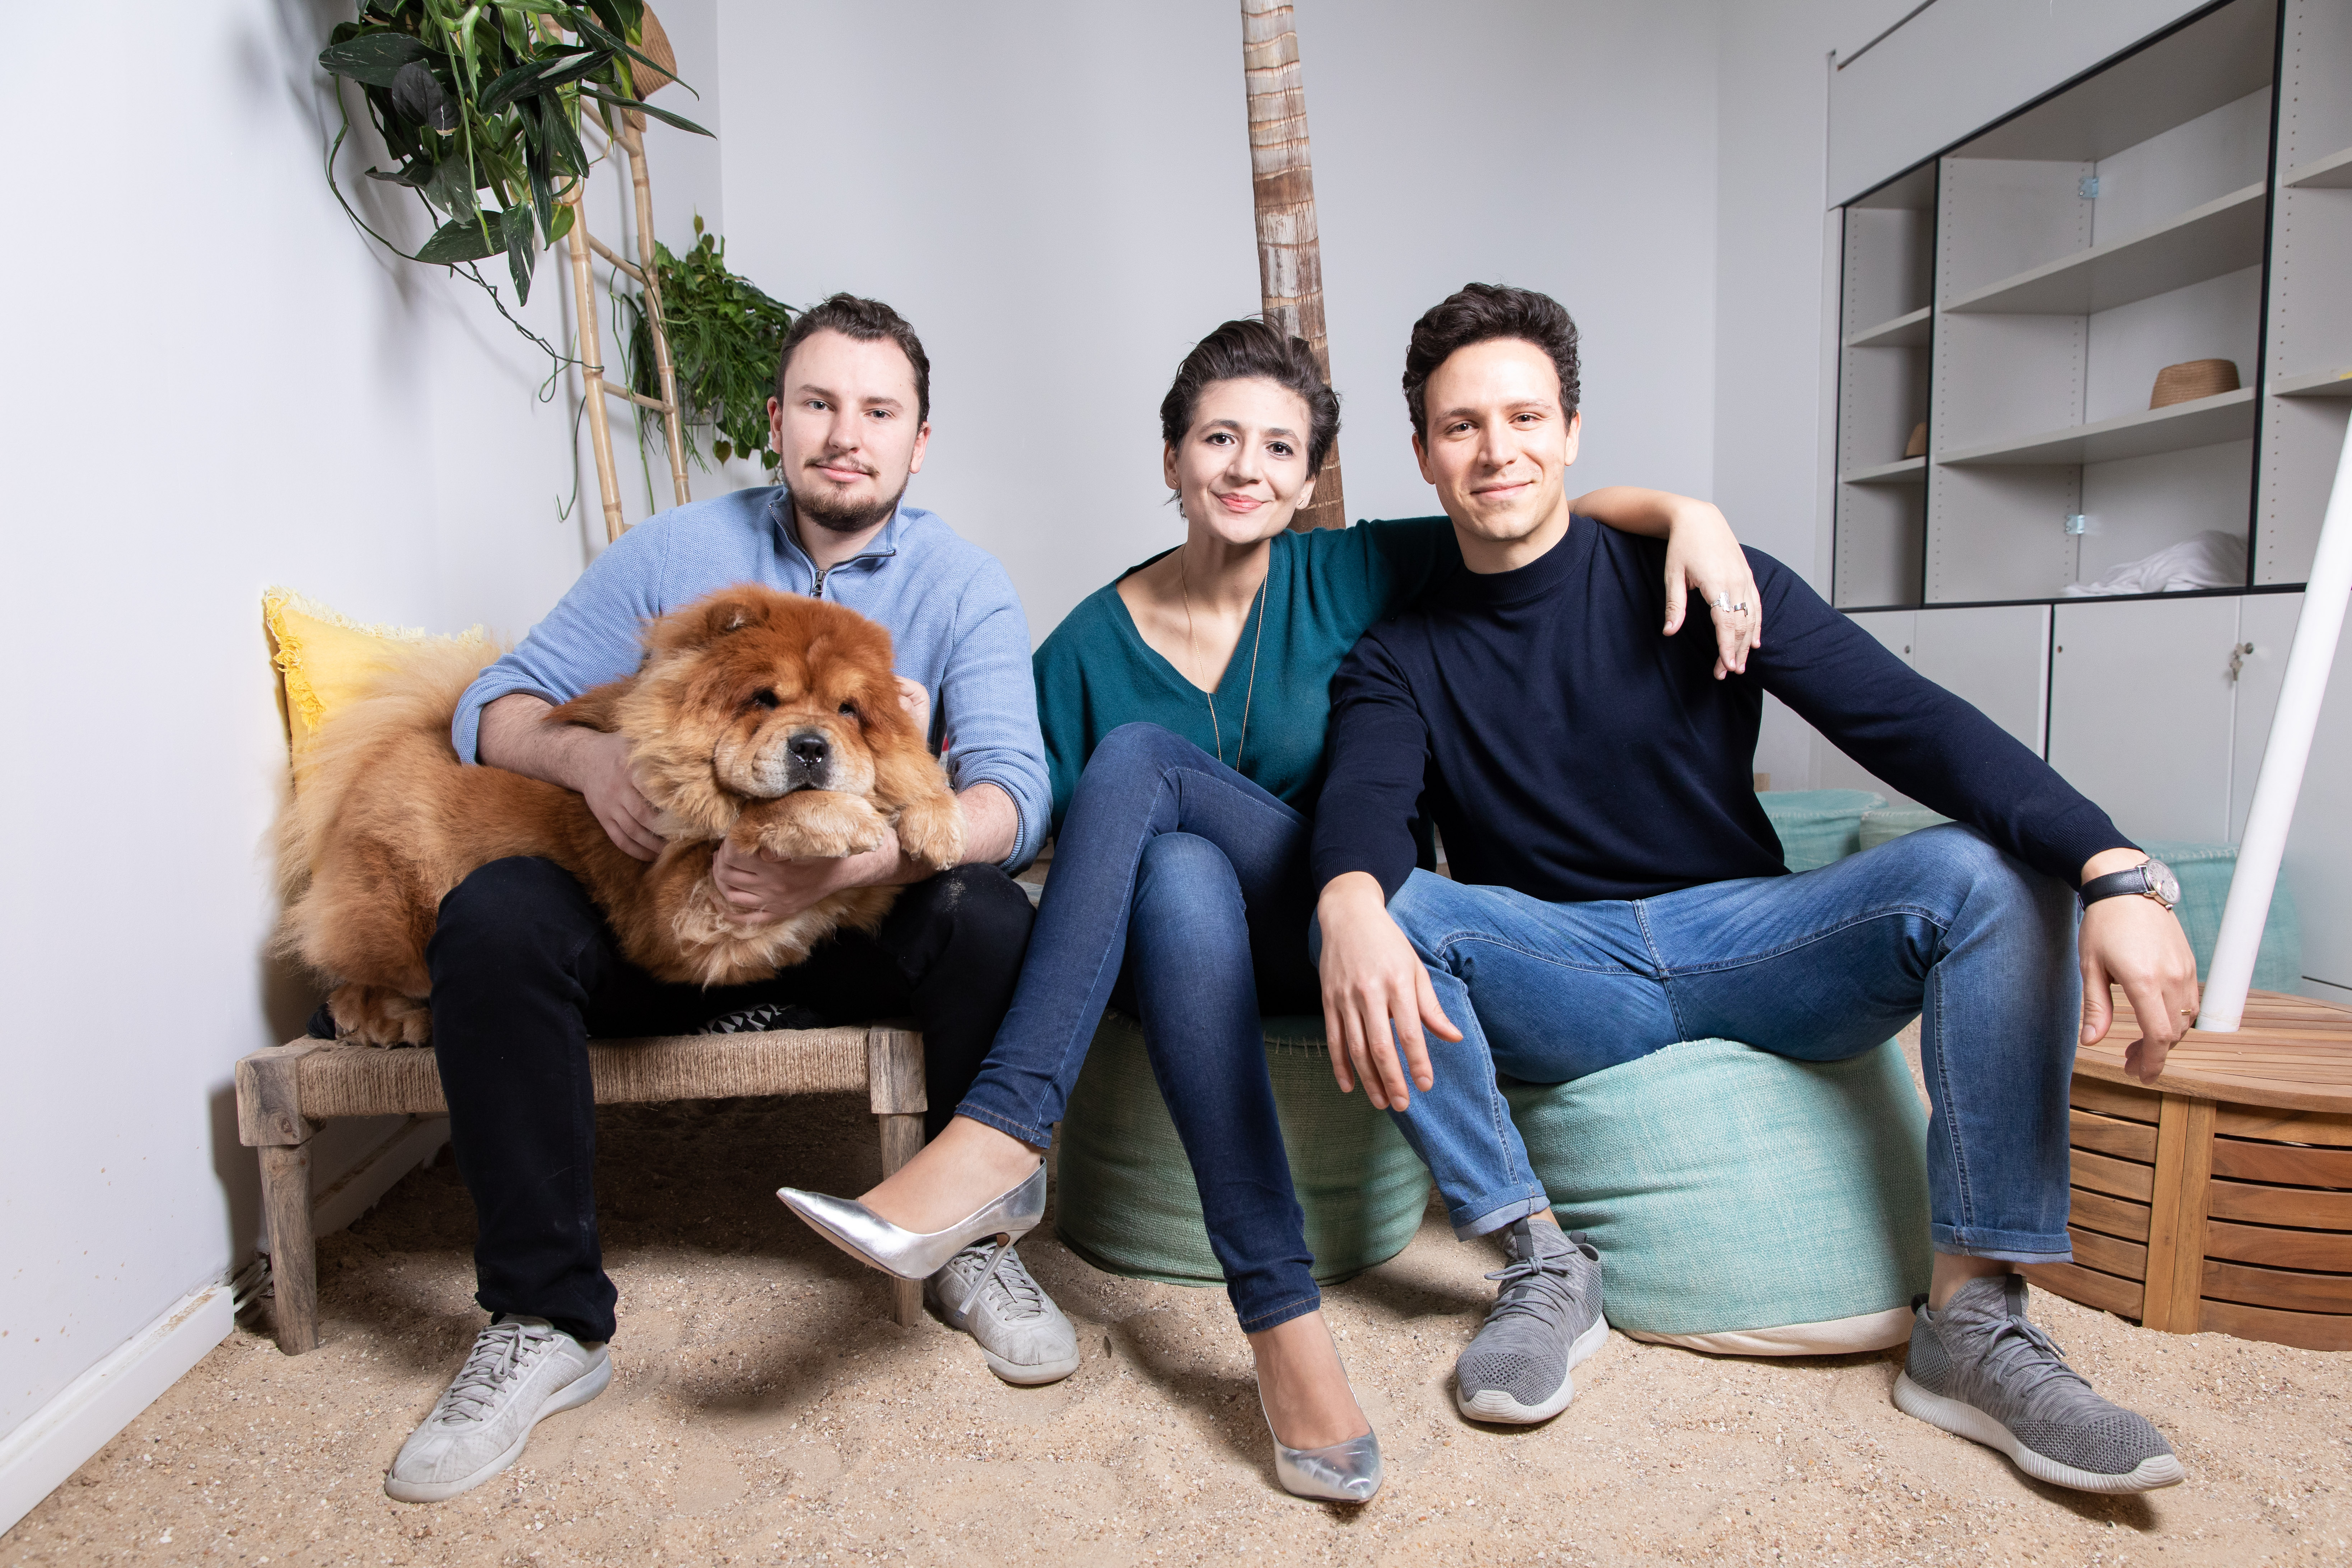 Leavy.co raises largest travel tech seed round, $14 million, to help millennials house swap and jet set